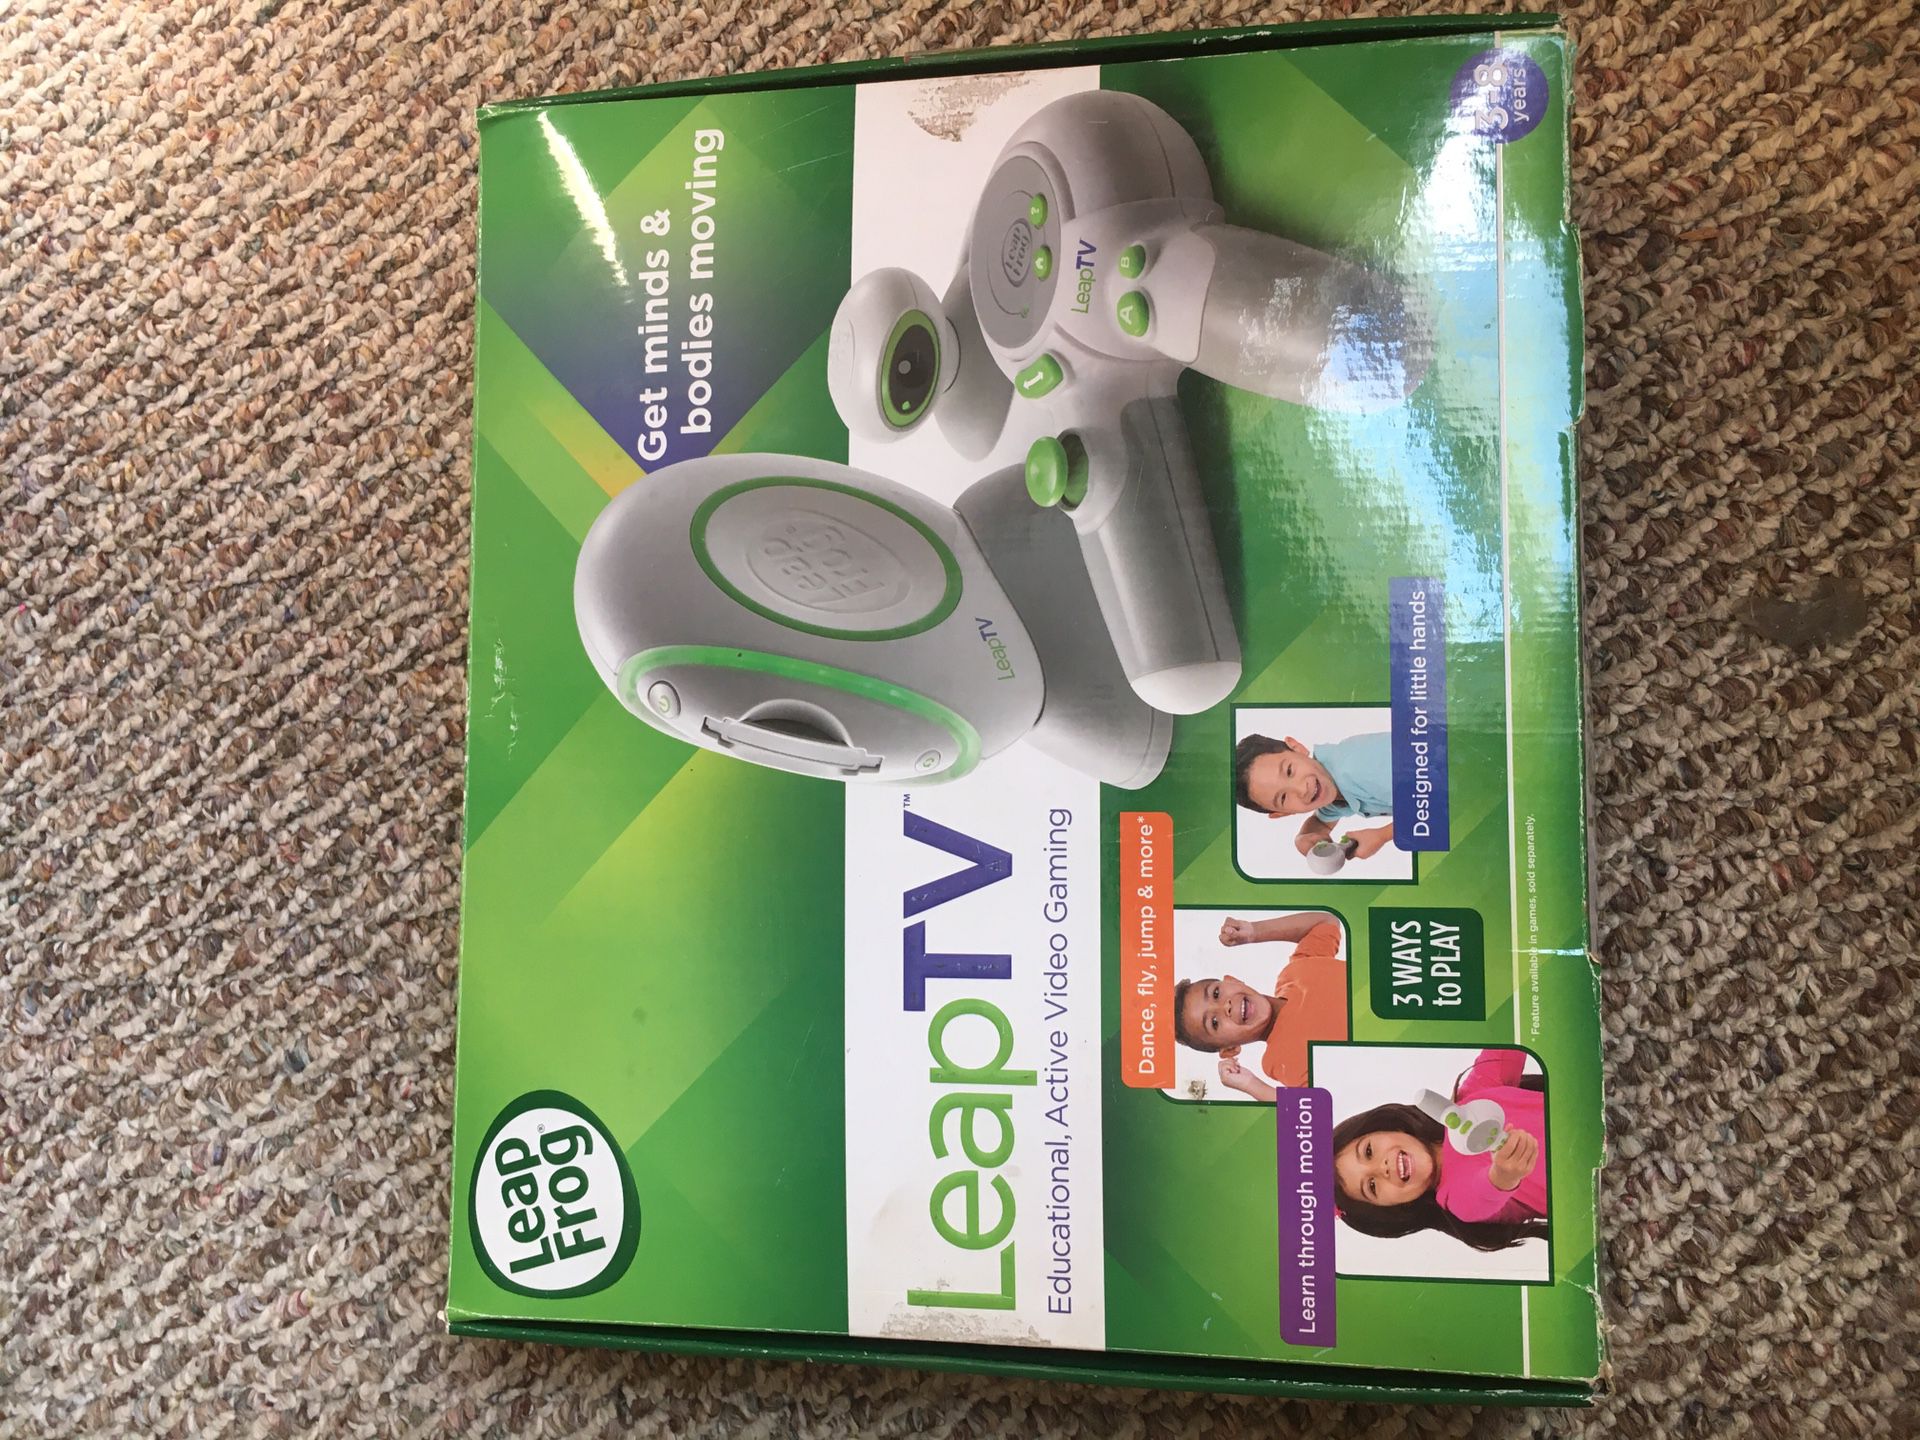 Leapfrog leapTV educational video game with 2 games